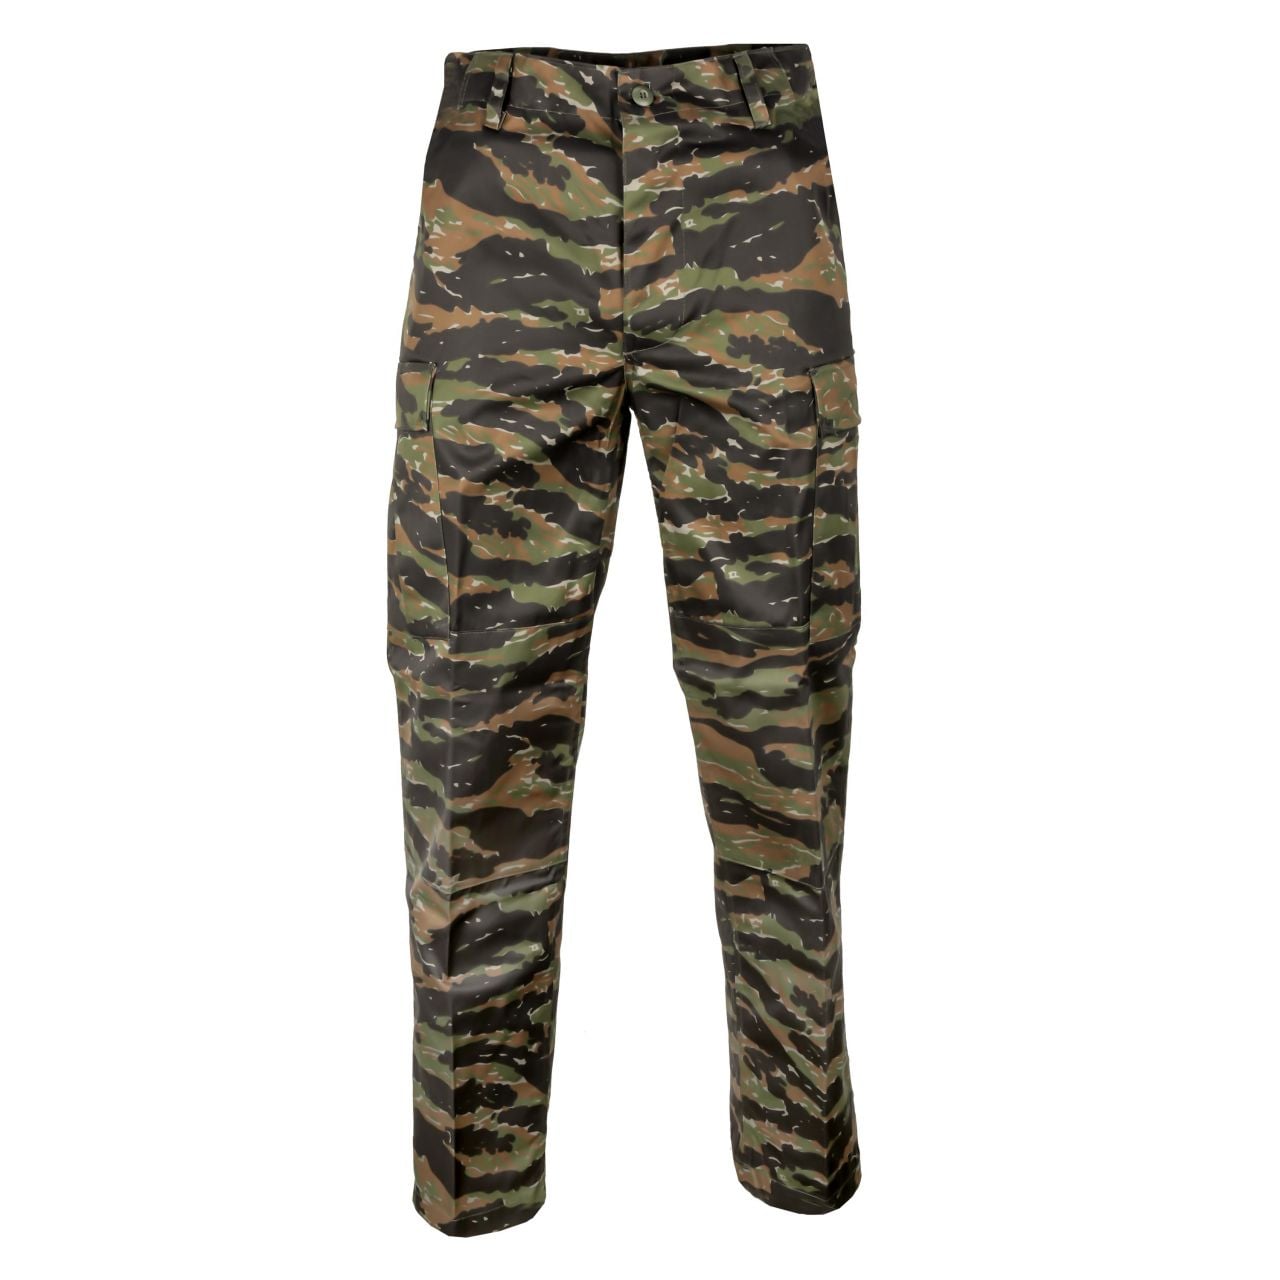 Purchase the BDU Style Pants black by ASMC